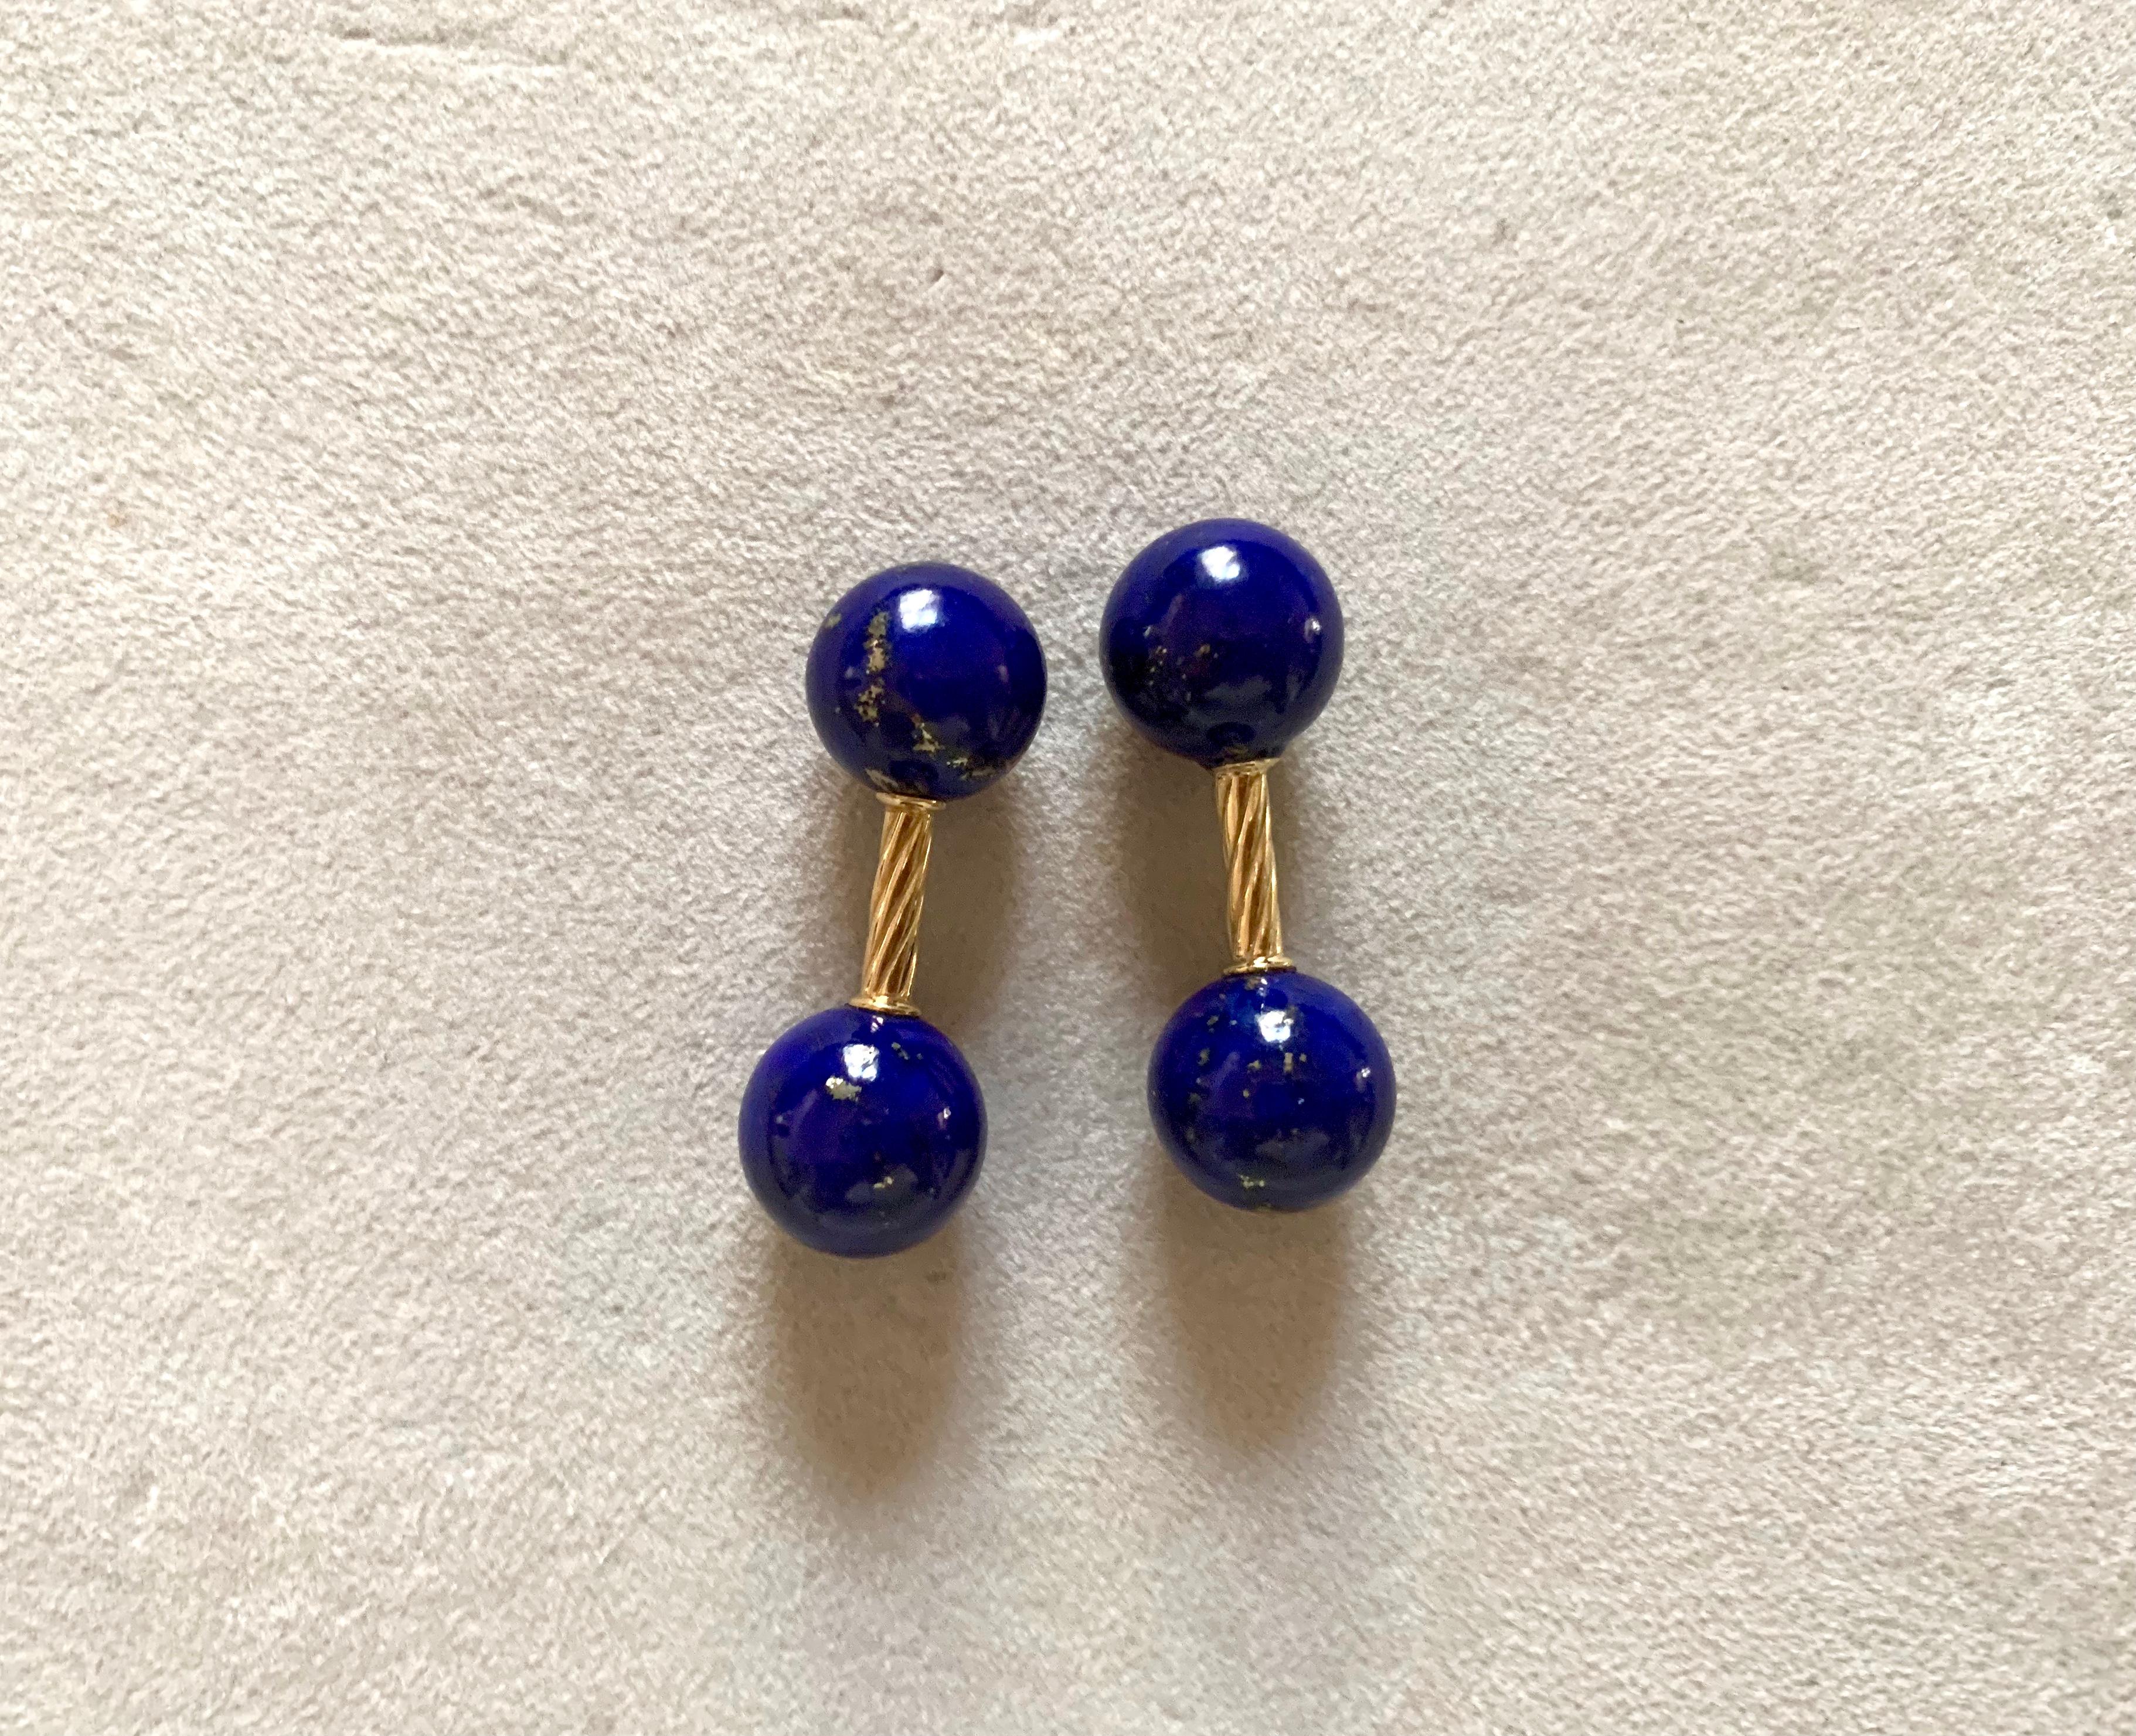 Simple and timeless, these cufflinks are a classic addition to any attire. Their front face and toggle are identical and are carved in a spherical shape out of lapis lazuli, whose dark blue shade strikingly complements the 18 karat yellow gold of